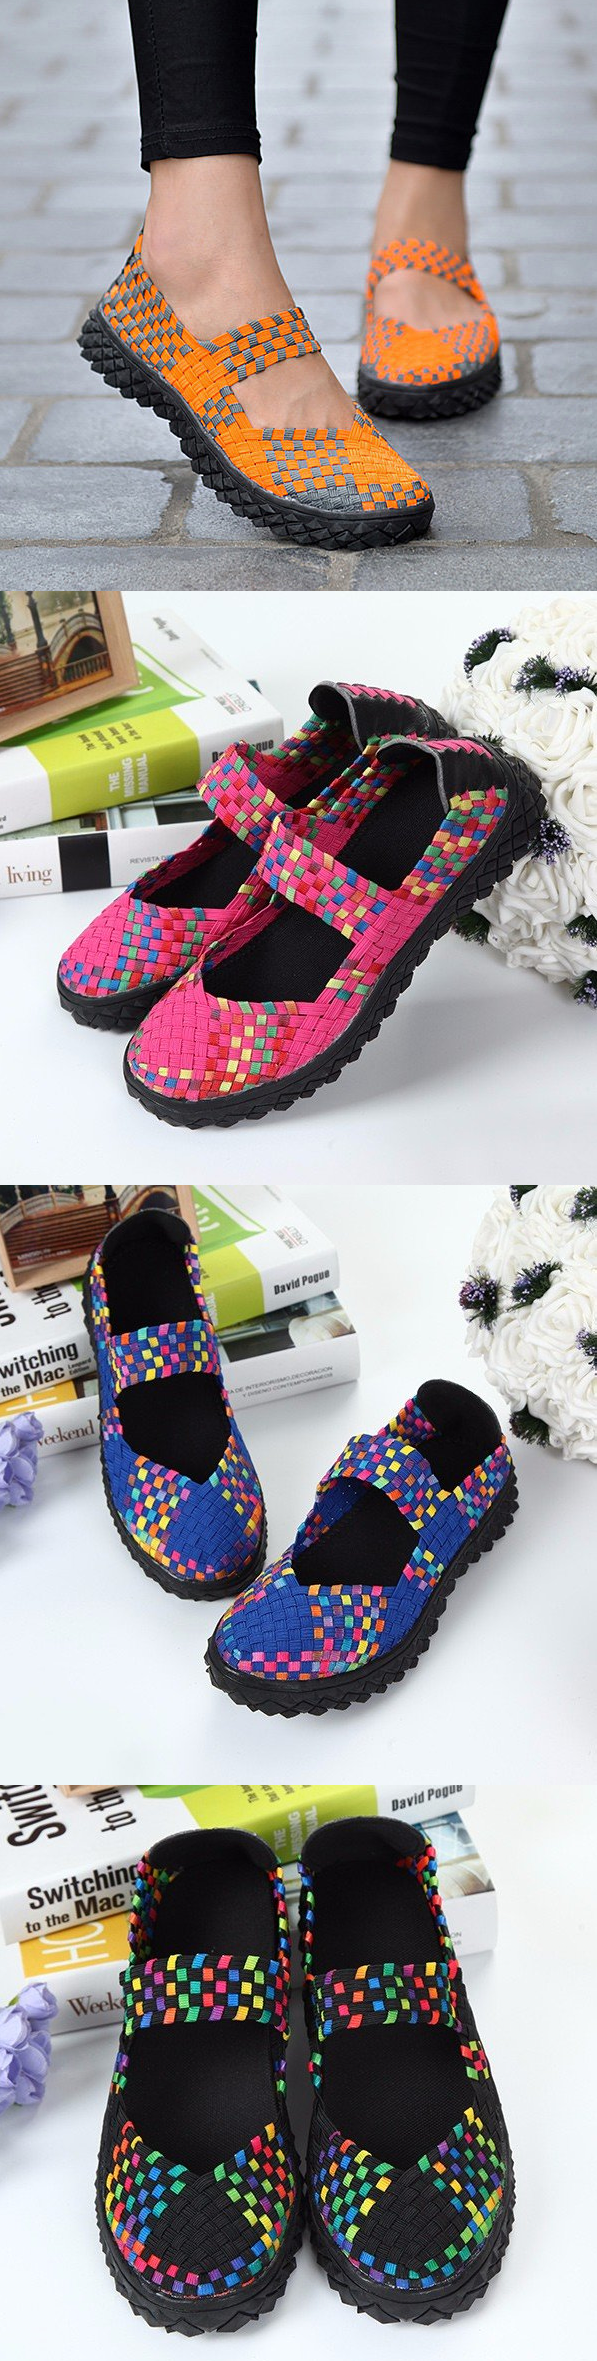 US$18.55 Color Match Knitting Elastic Handmade Slip On Flat Casual Outdoor Shoes